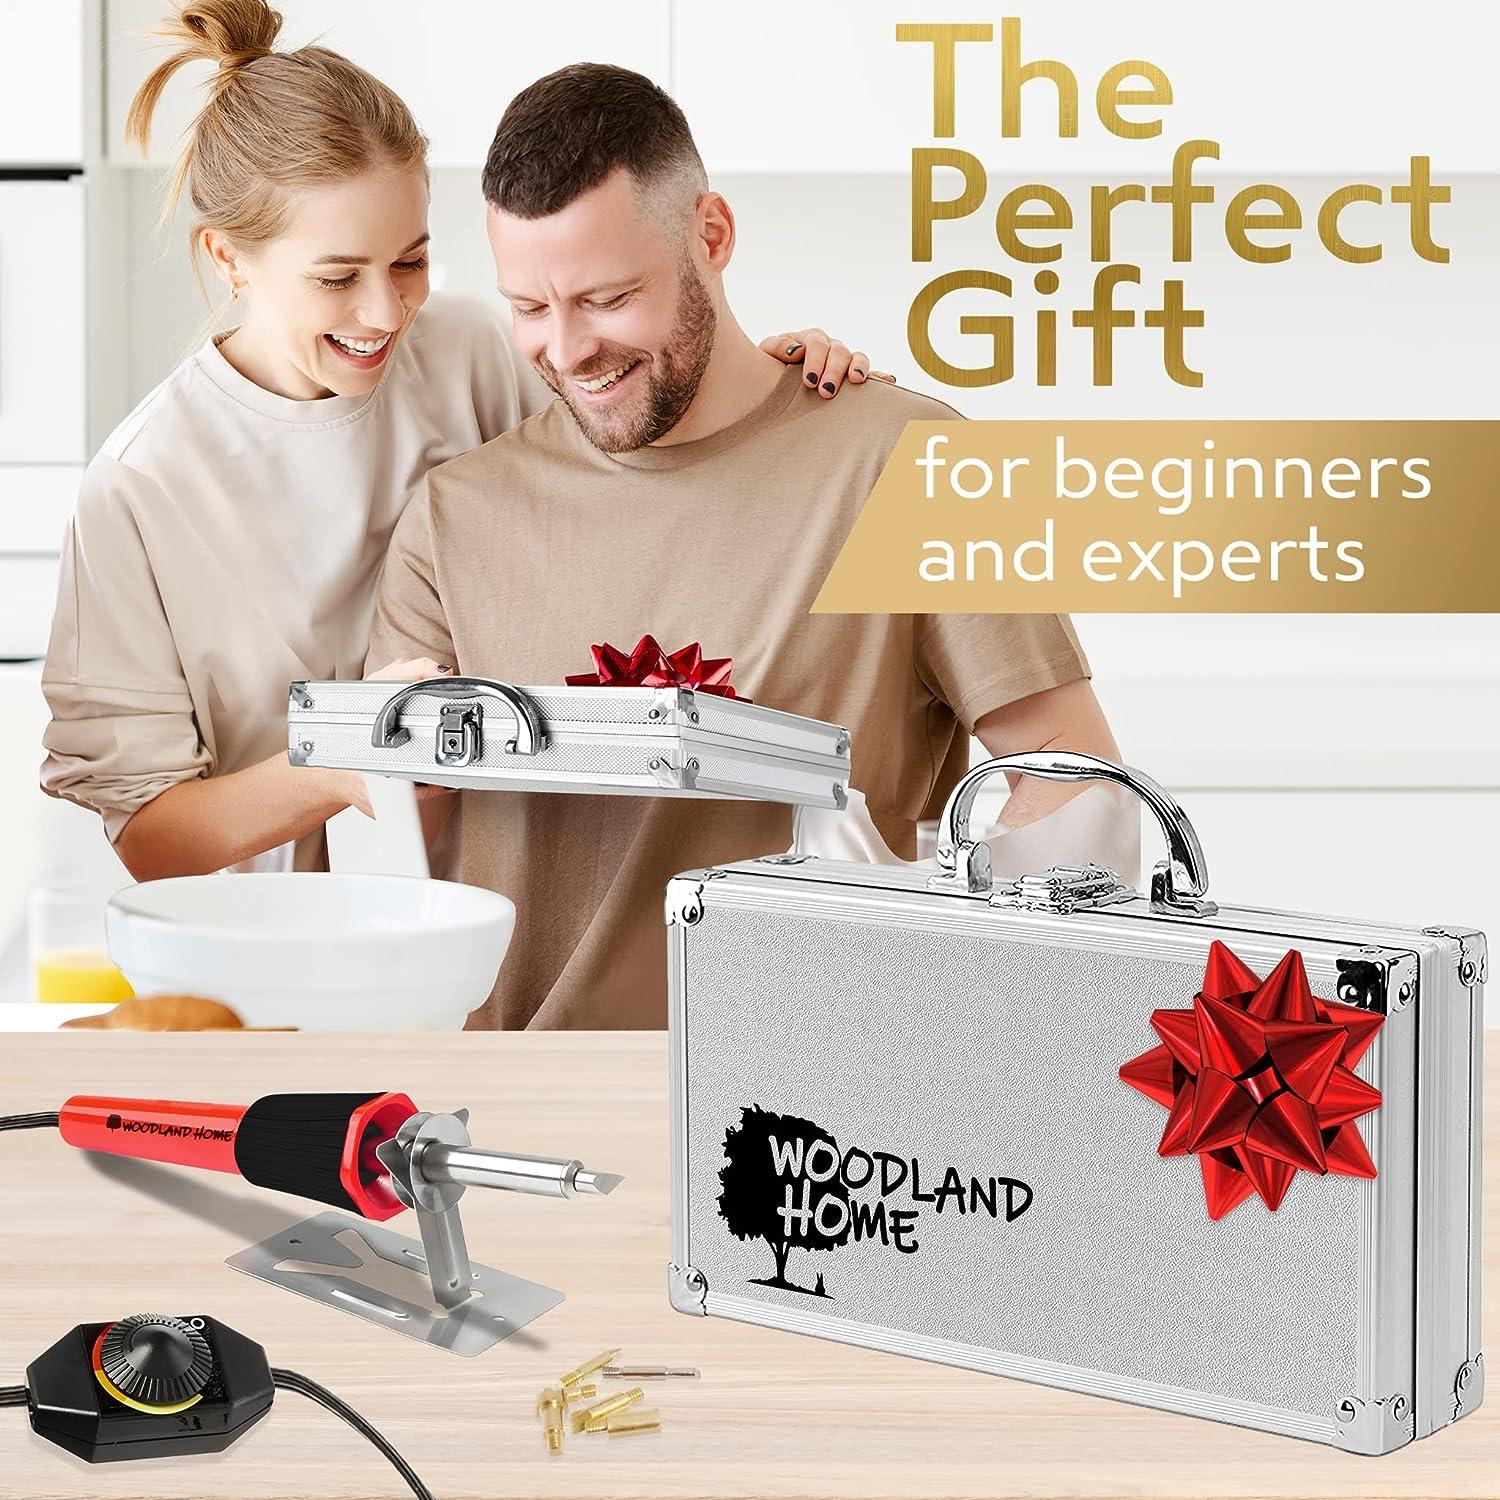 How to Buy the Best Wood Burning Kit for Kids This Christmas